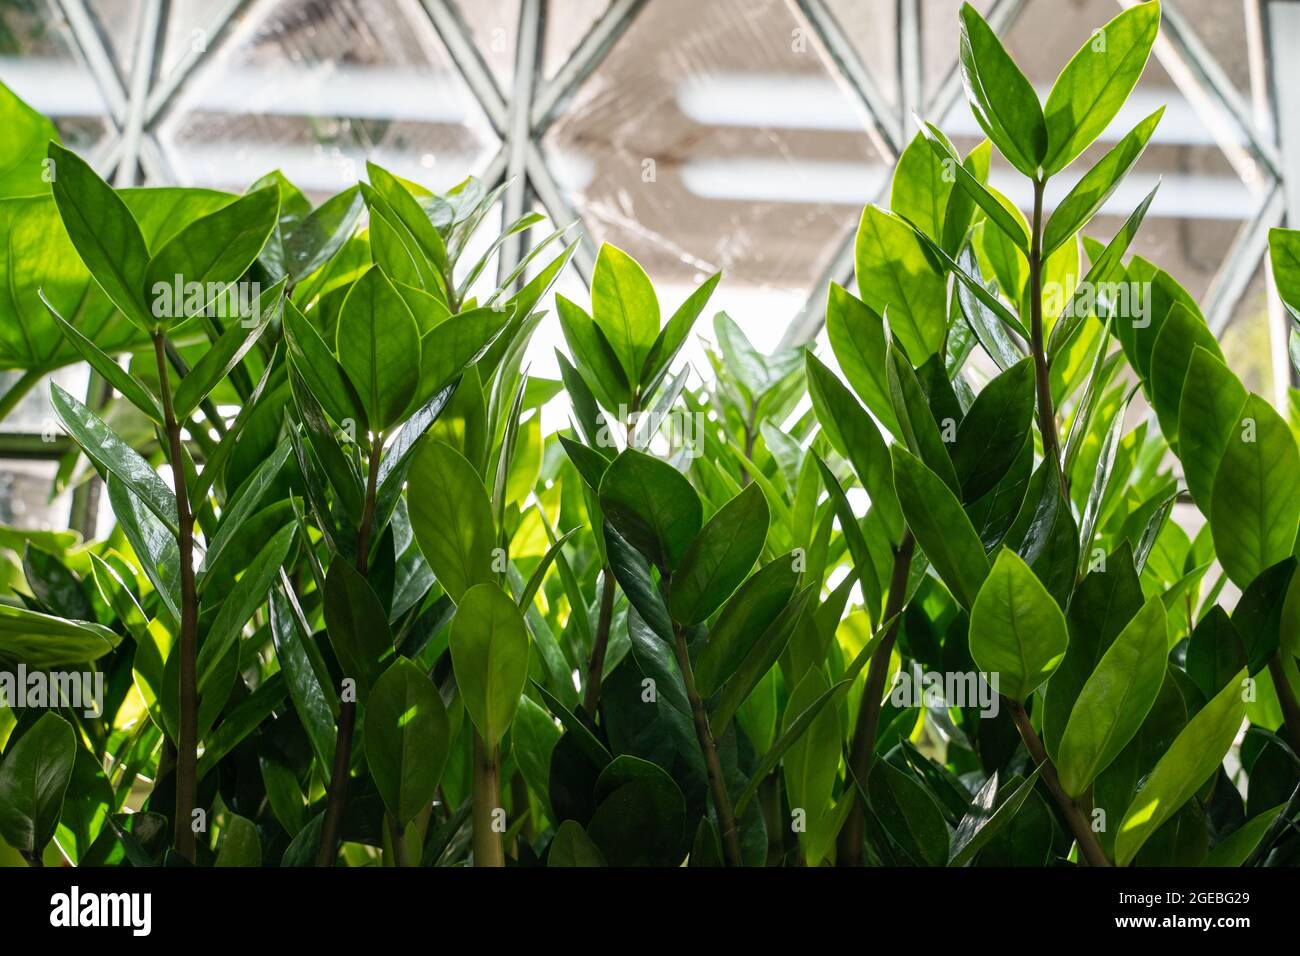 Rows of house plant zamiokulkas with green leaves and branches growing in greenhouse. Home gardening Stock Photo